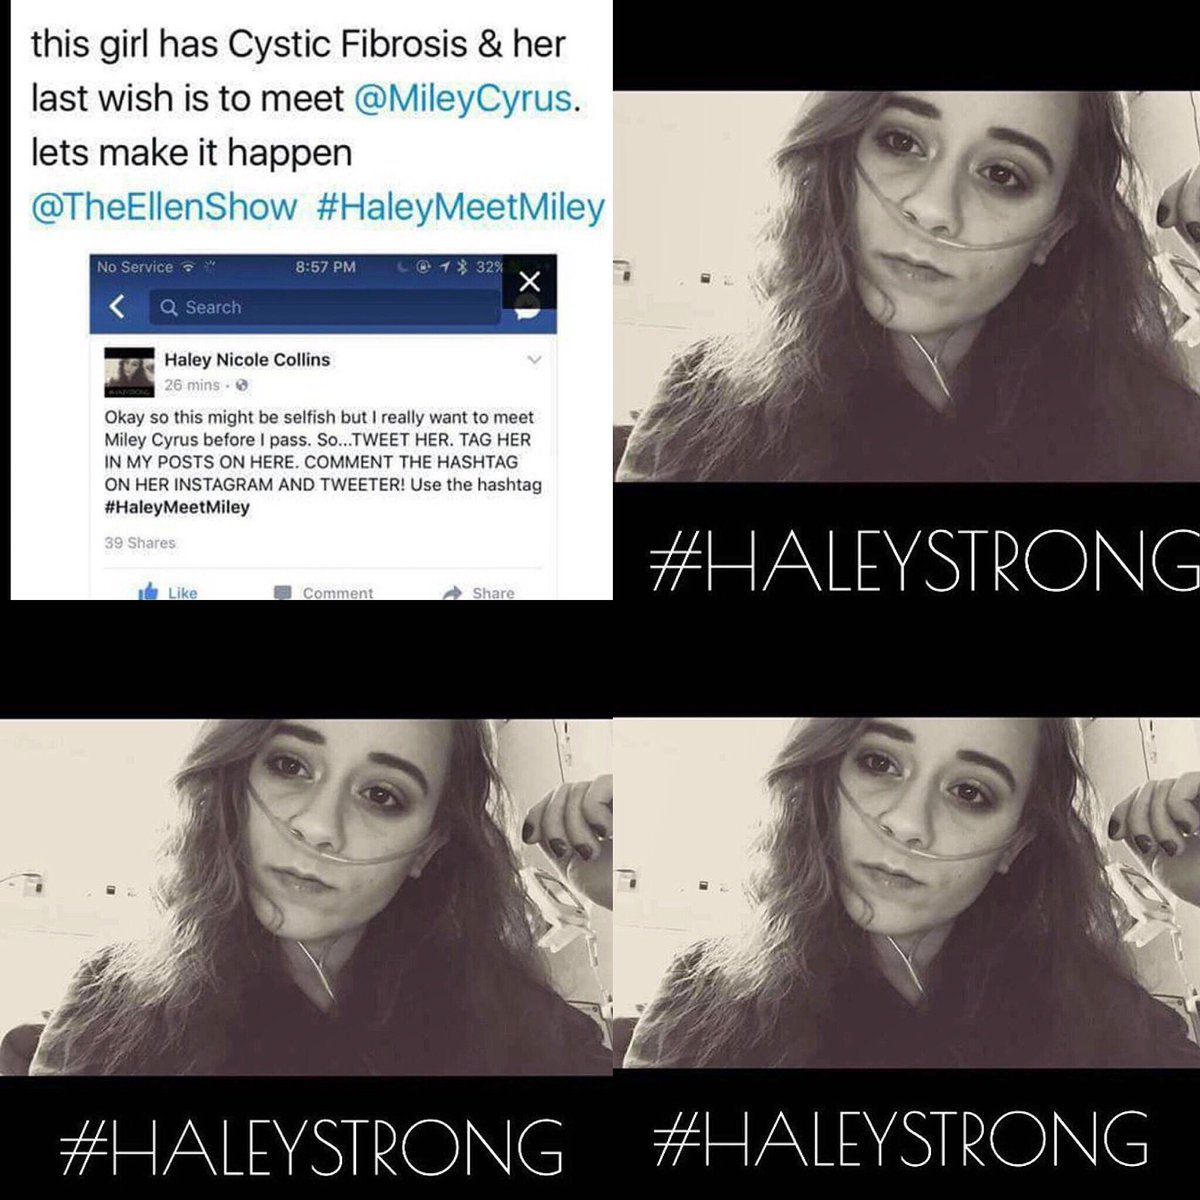 Idk Haley but Ik she's from Edwardsburg Michigan & has been told she only has 1 year to live #haleystrong #haleymeetmiley #ellenshow